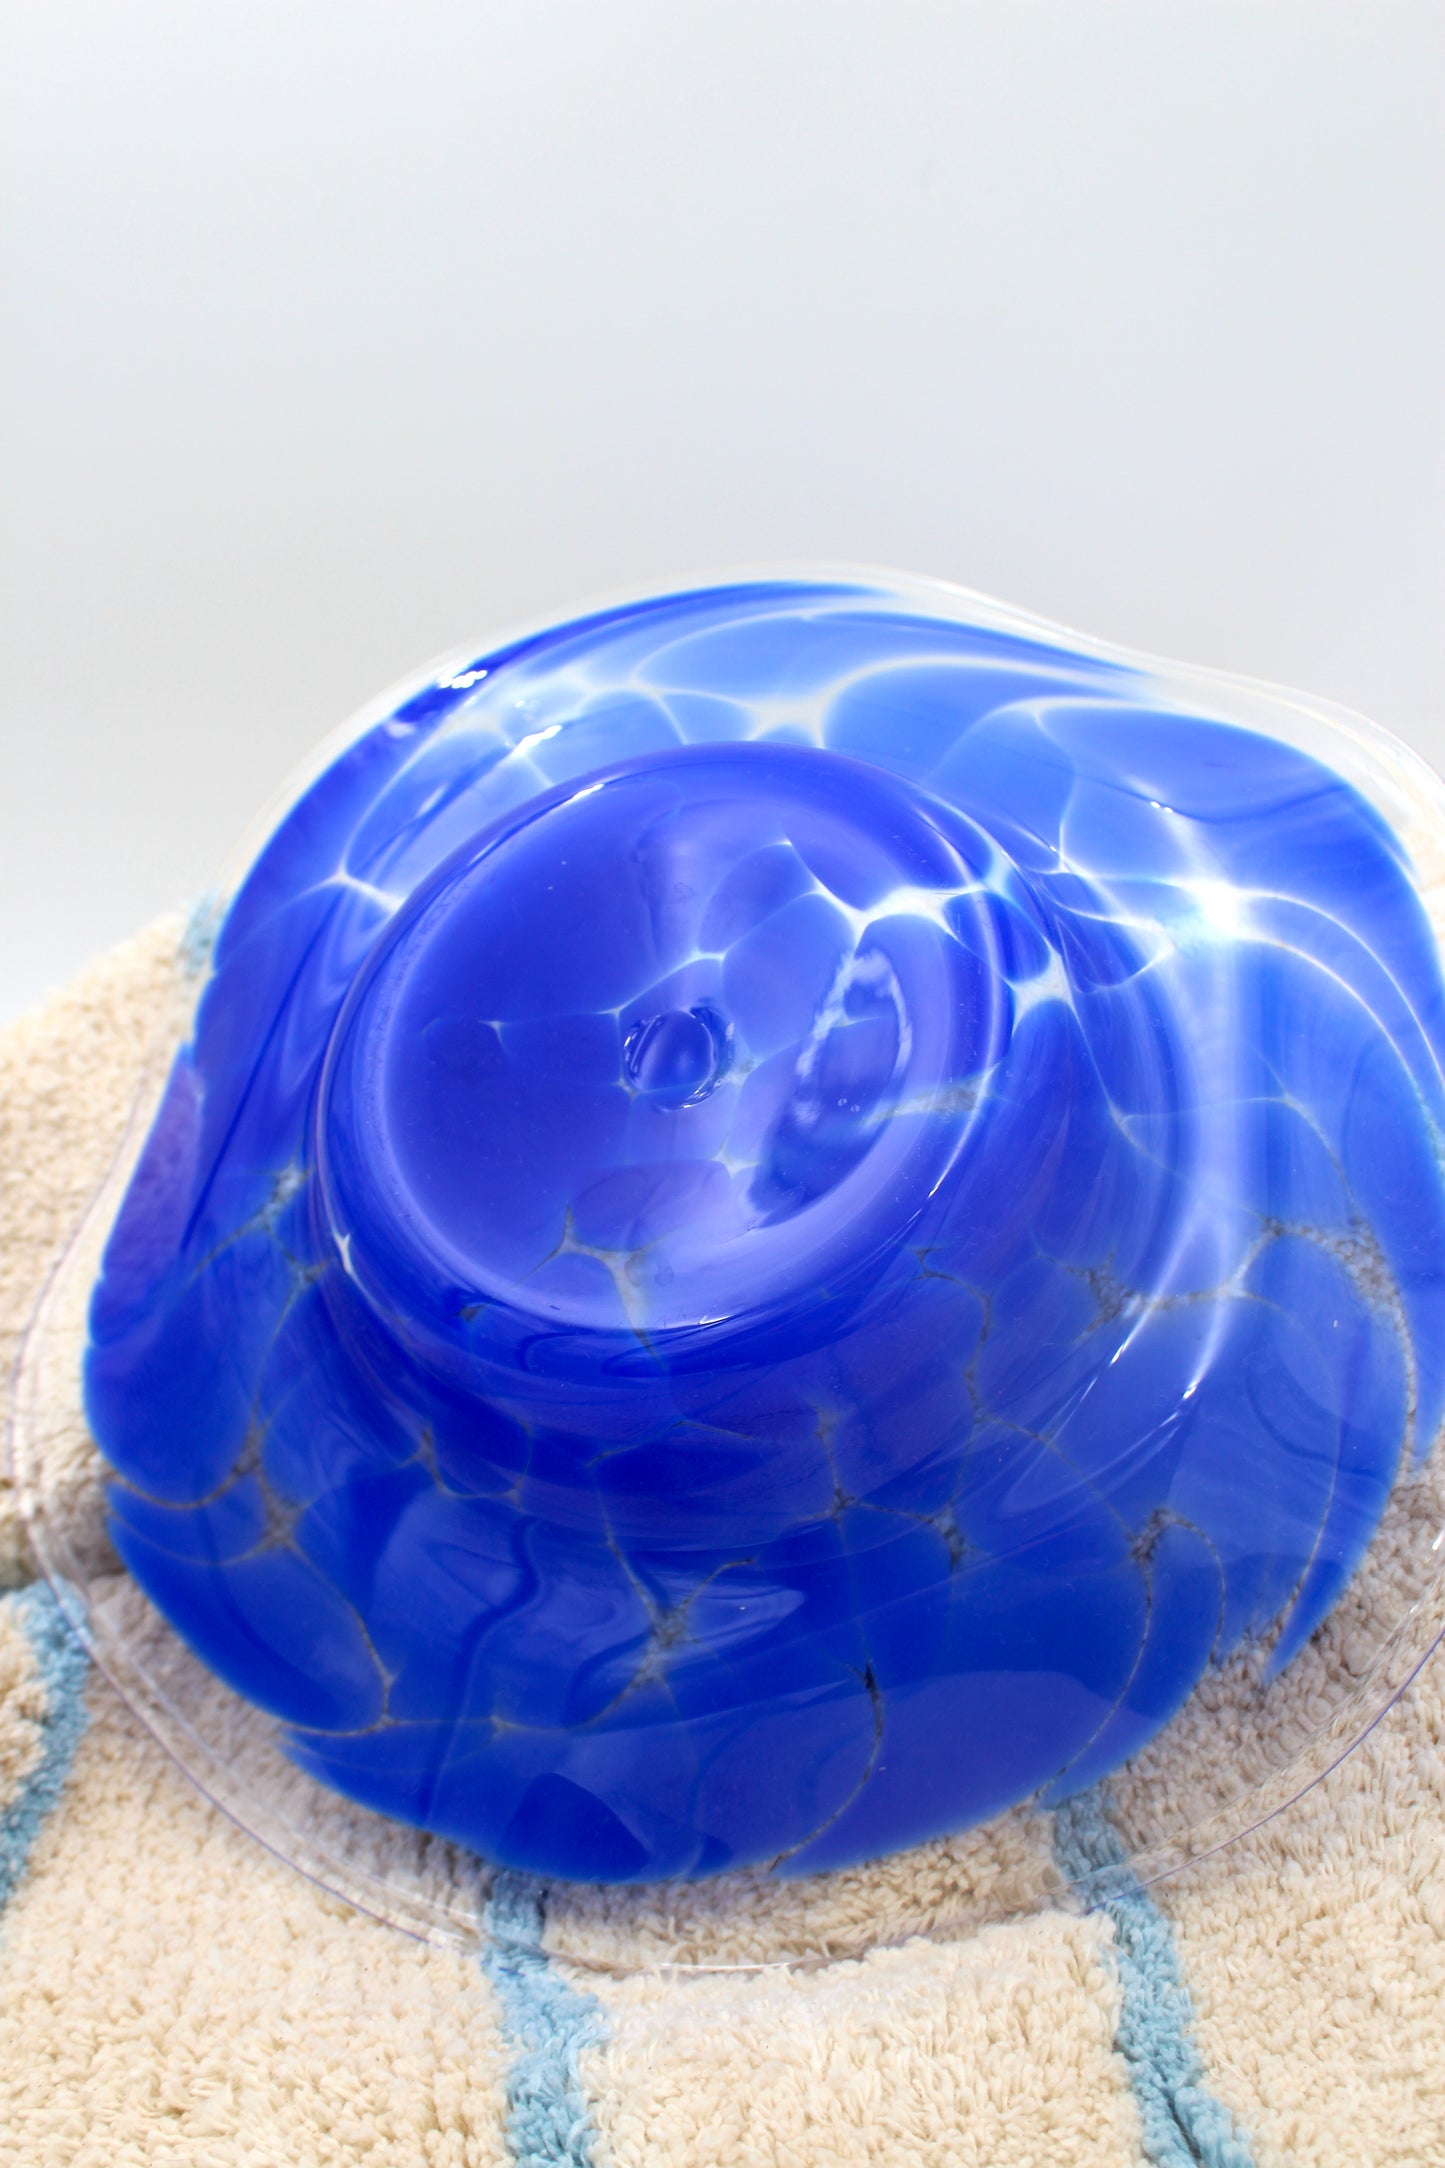 Stained blue dish